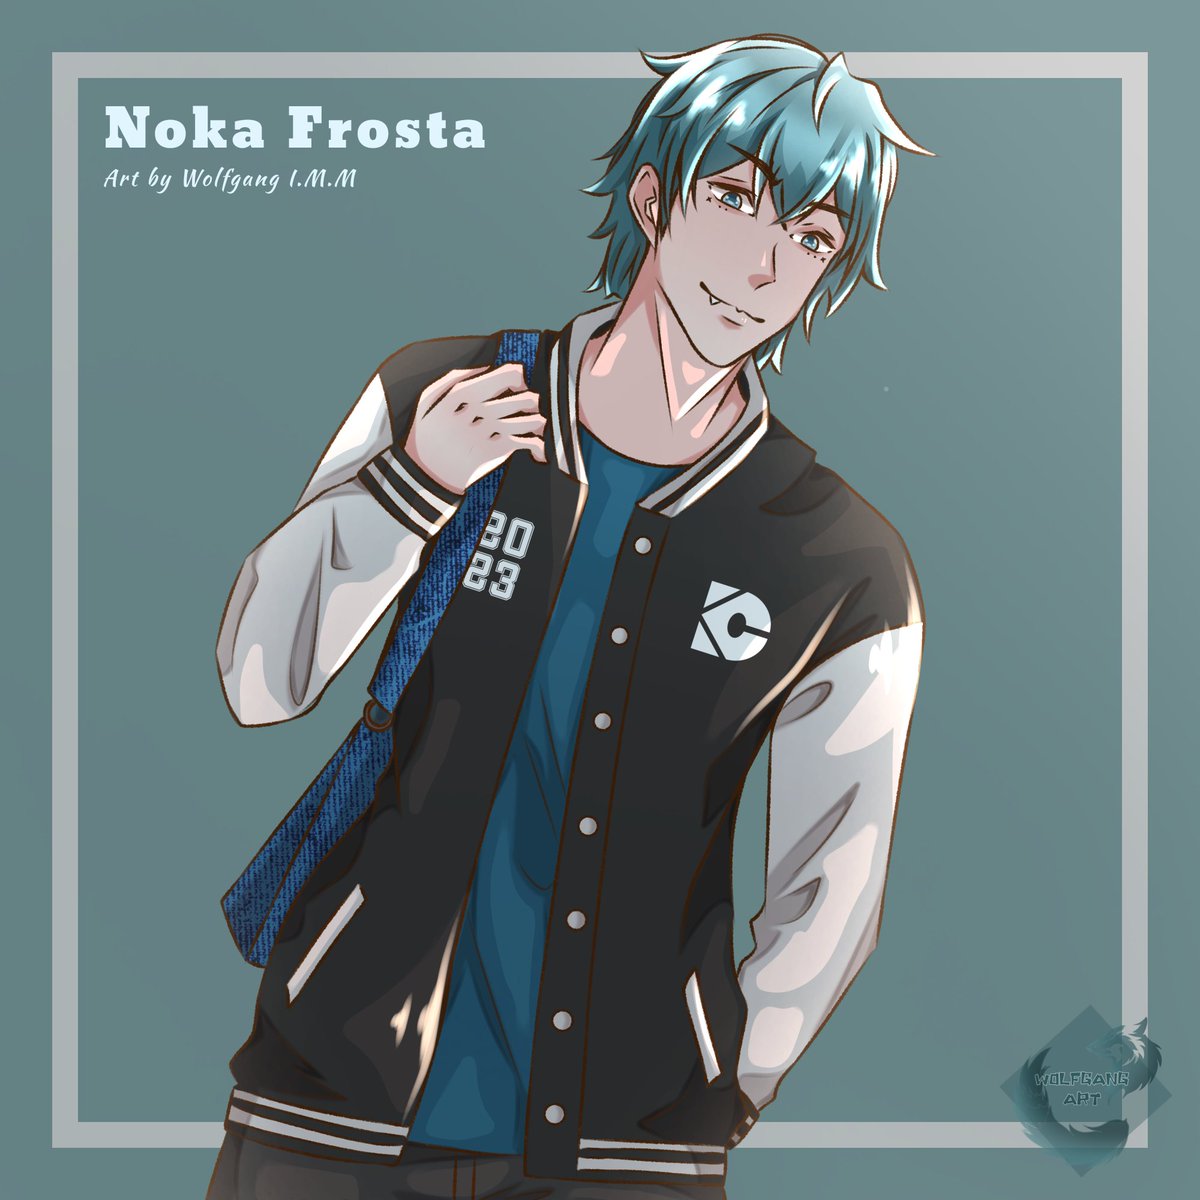 This time, Noka is joining the drawing challenge from @DrawCommunity_ ✨ I hope you guys like it 🔥
#dc_varsitycollab2023 #drawingcommunity #artidn #art #artwork #noka #originalcharacter #challenge